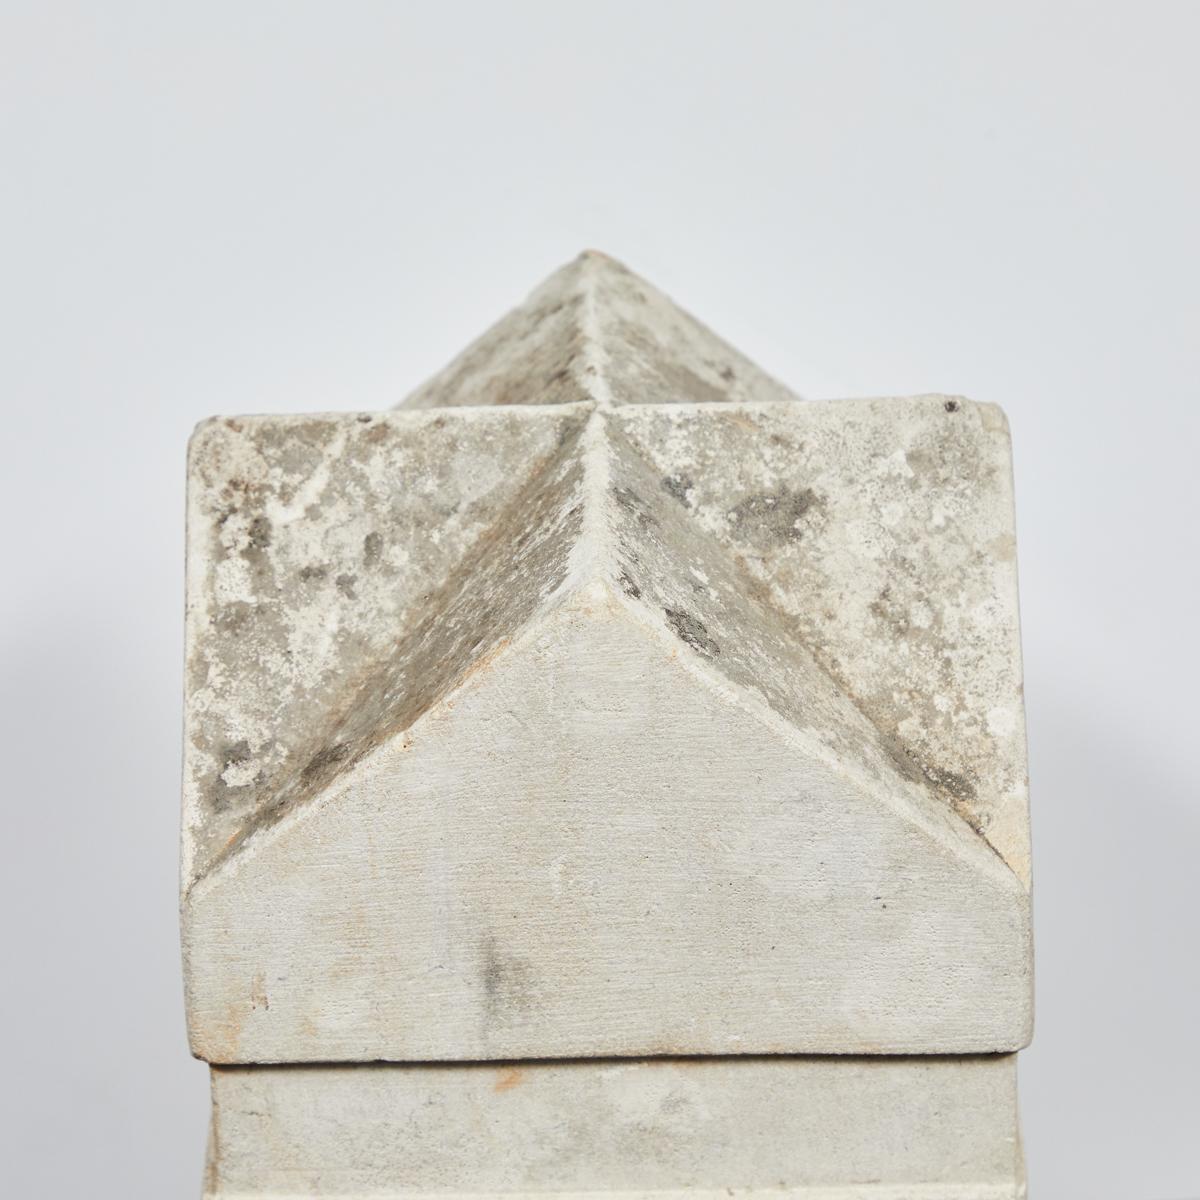 An ornamental stone from Tetbury, England. This item features a set of ornamental intersecting gables carved into the top of the stone. 
 